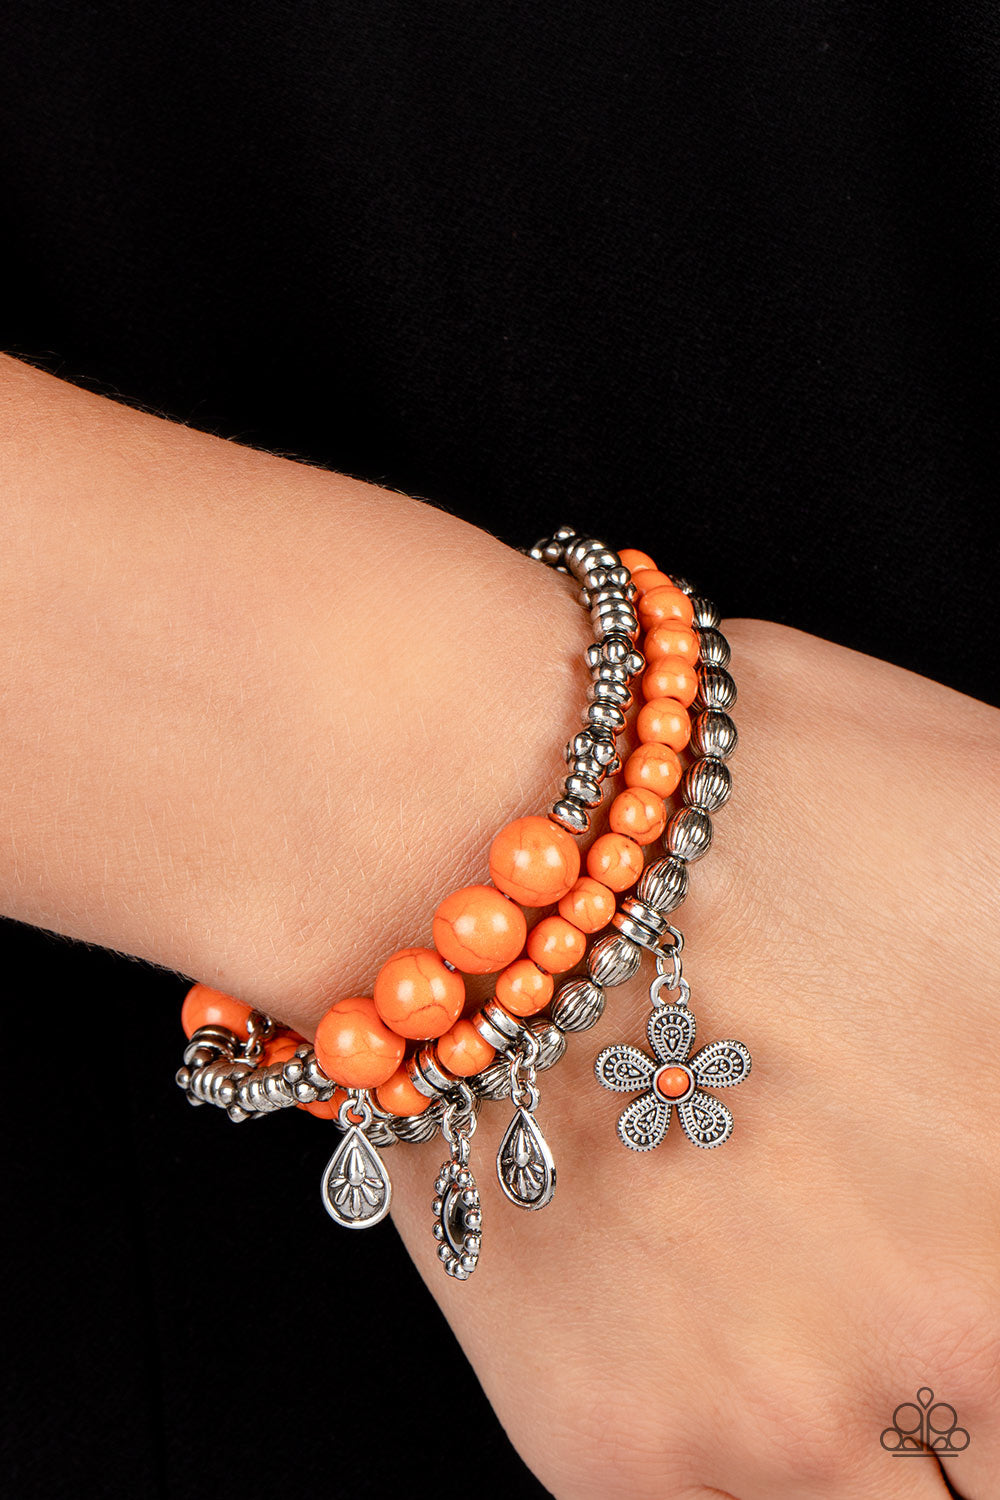 A trio of floral-inspired bracelets, featuring comfortable stretchy bands and smooth orange stones, stack along the wrist to create a bold statement piece